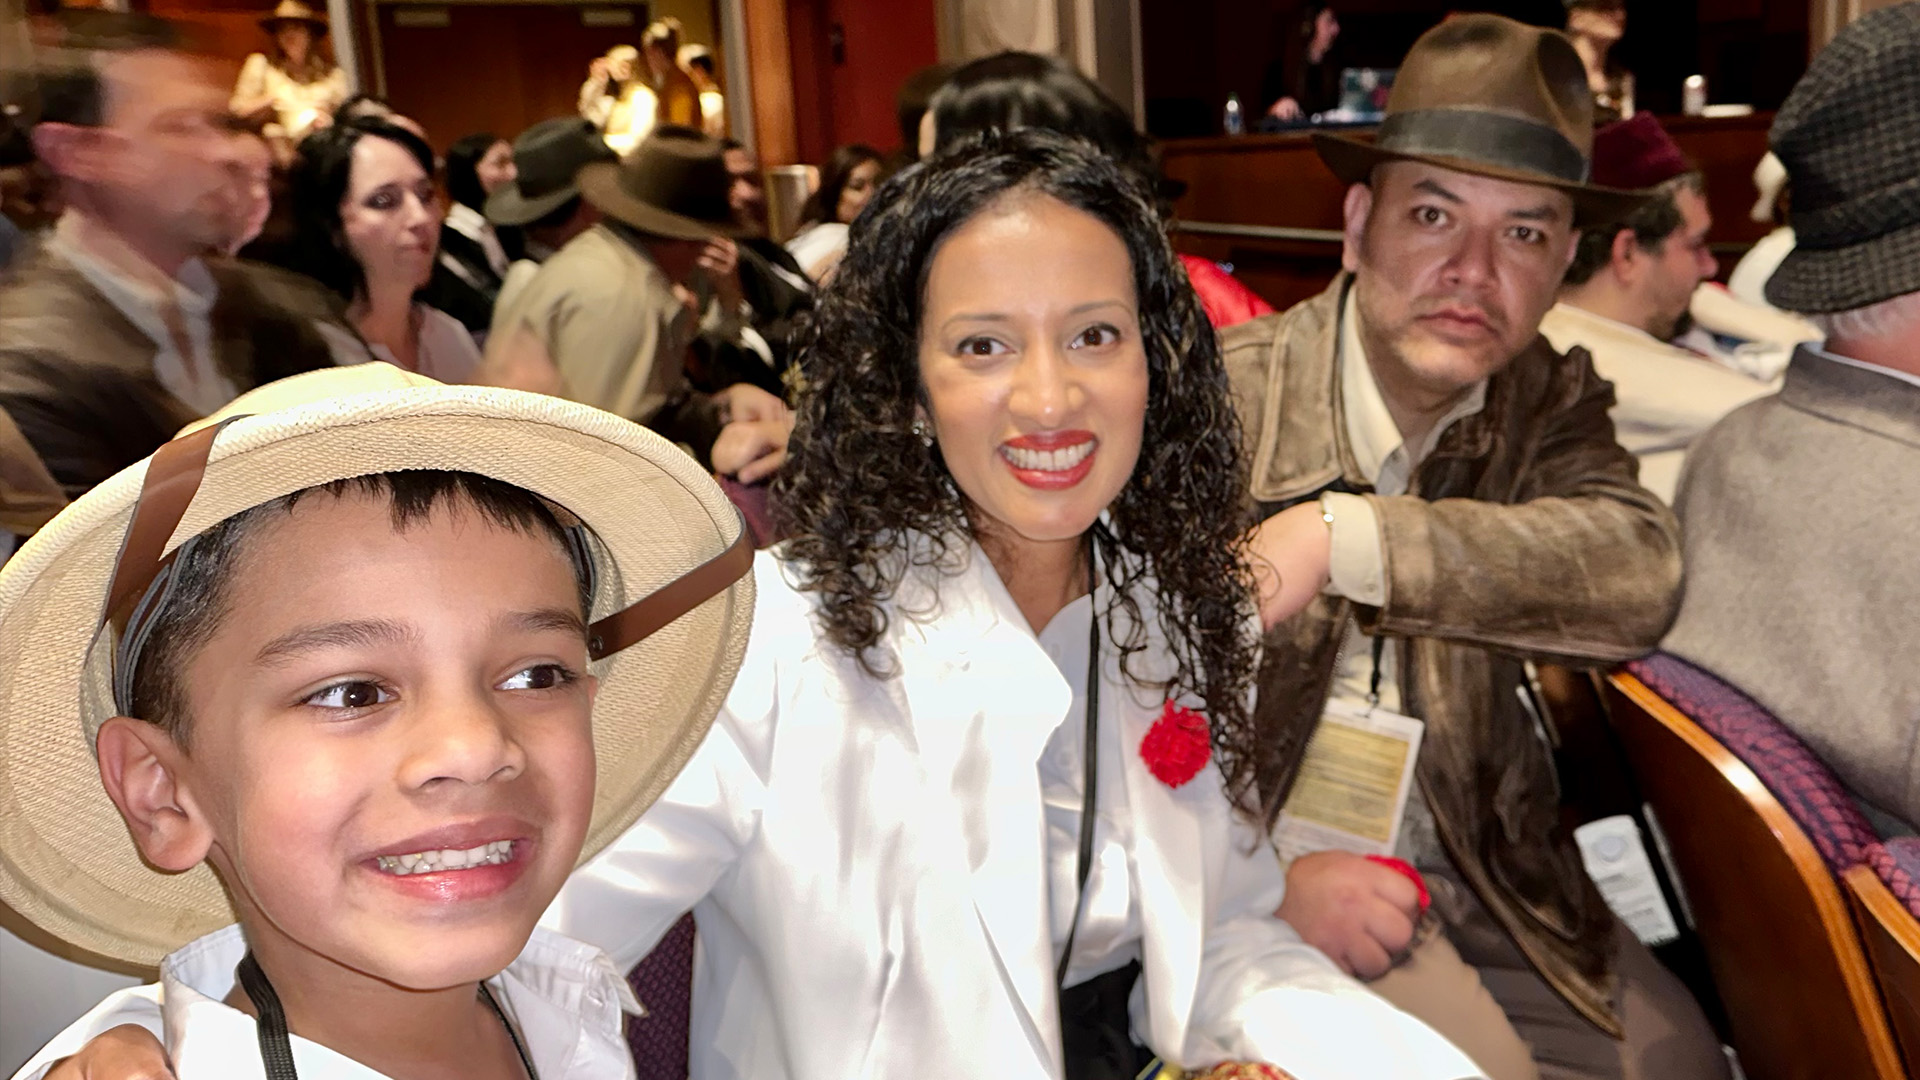 The Hills family at the Indiana Jones premiere.